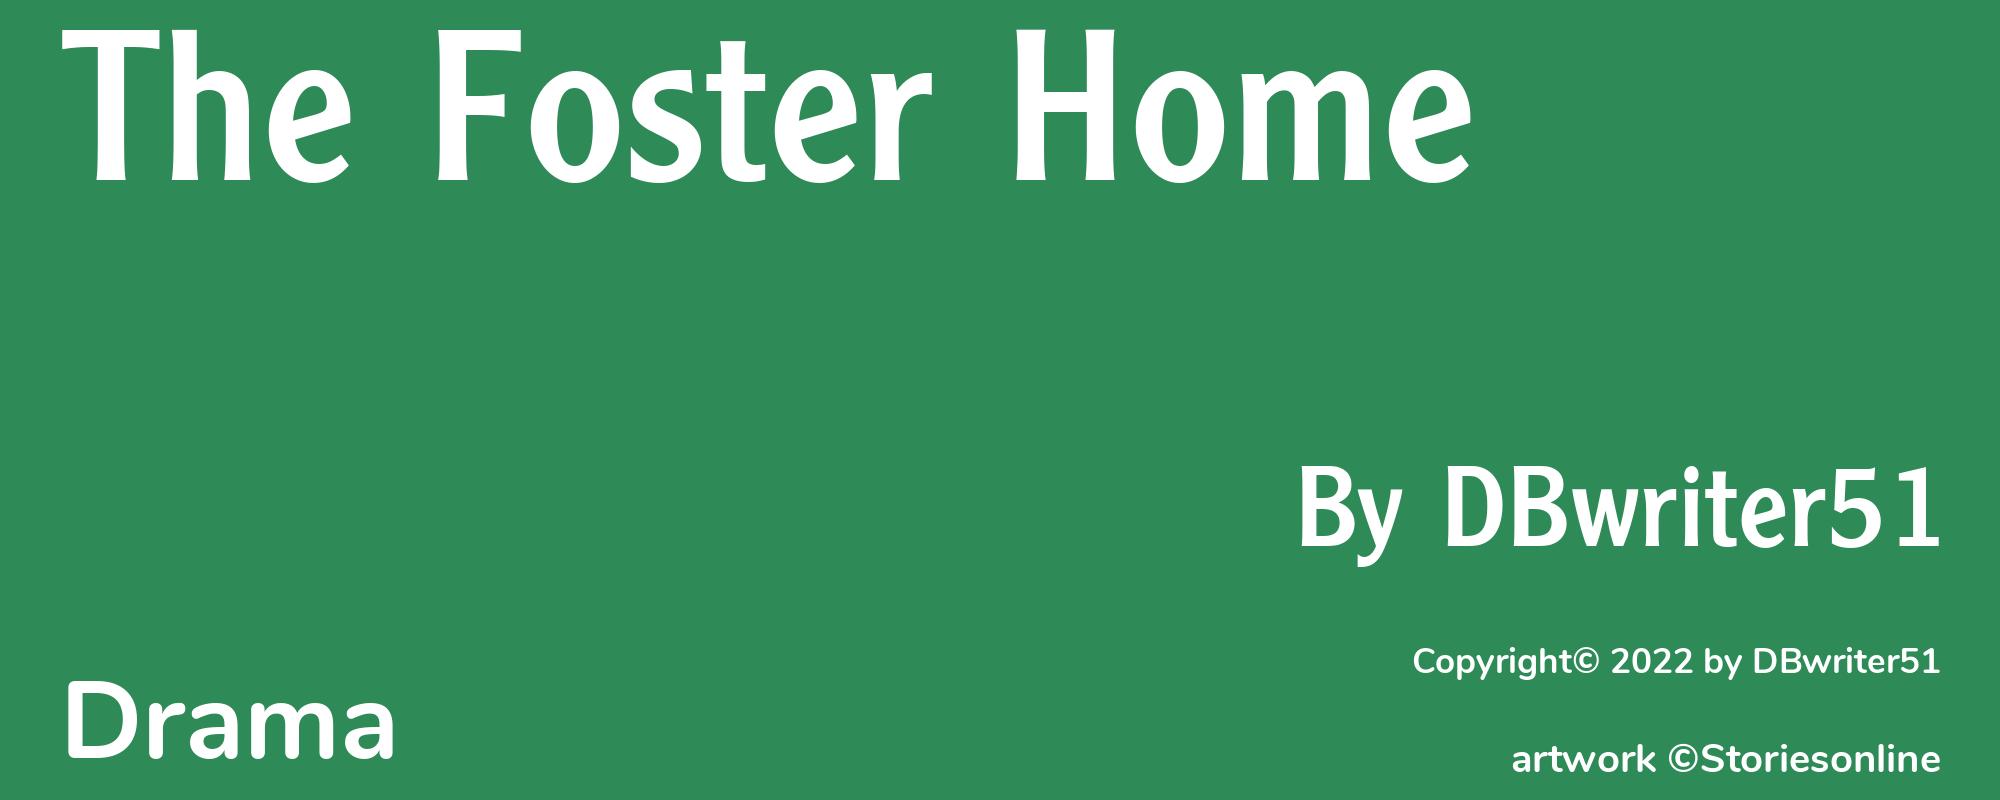 The Foster Home - Cover